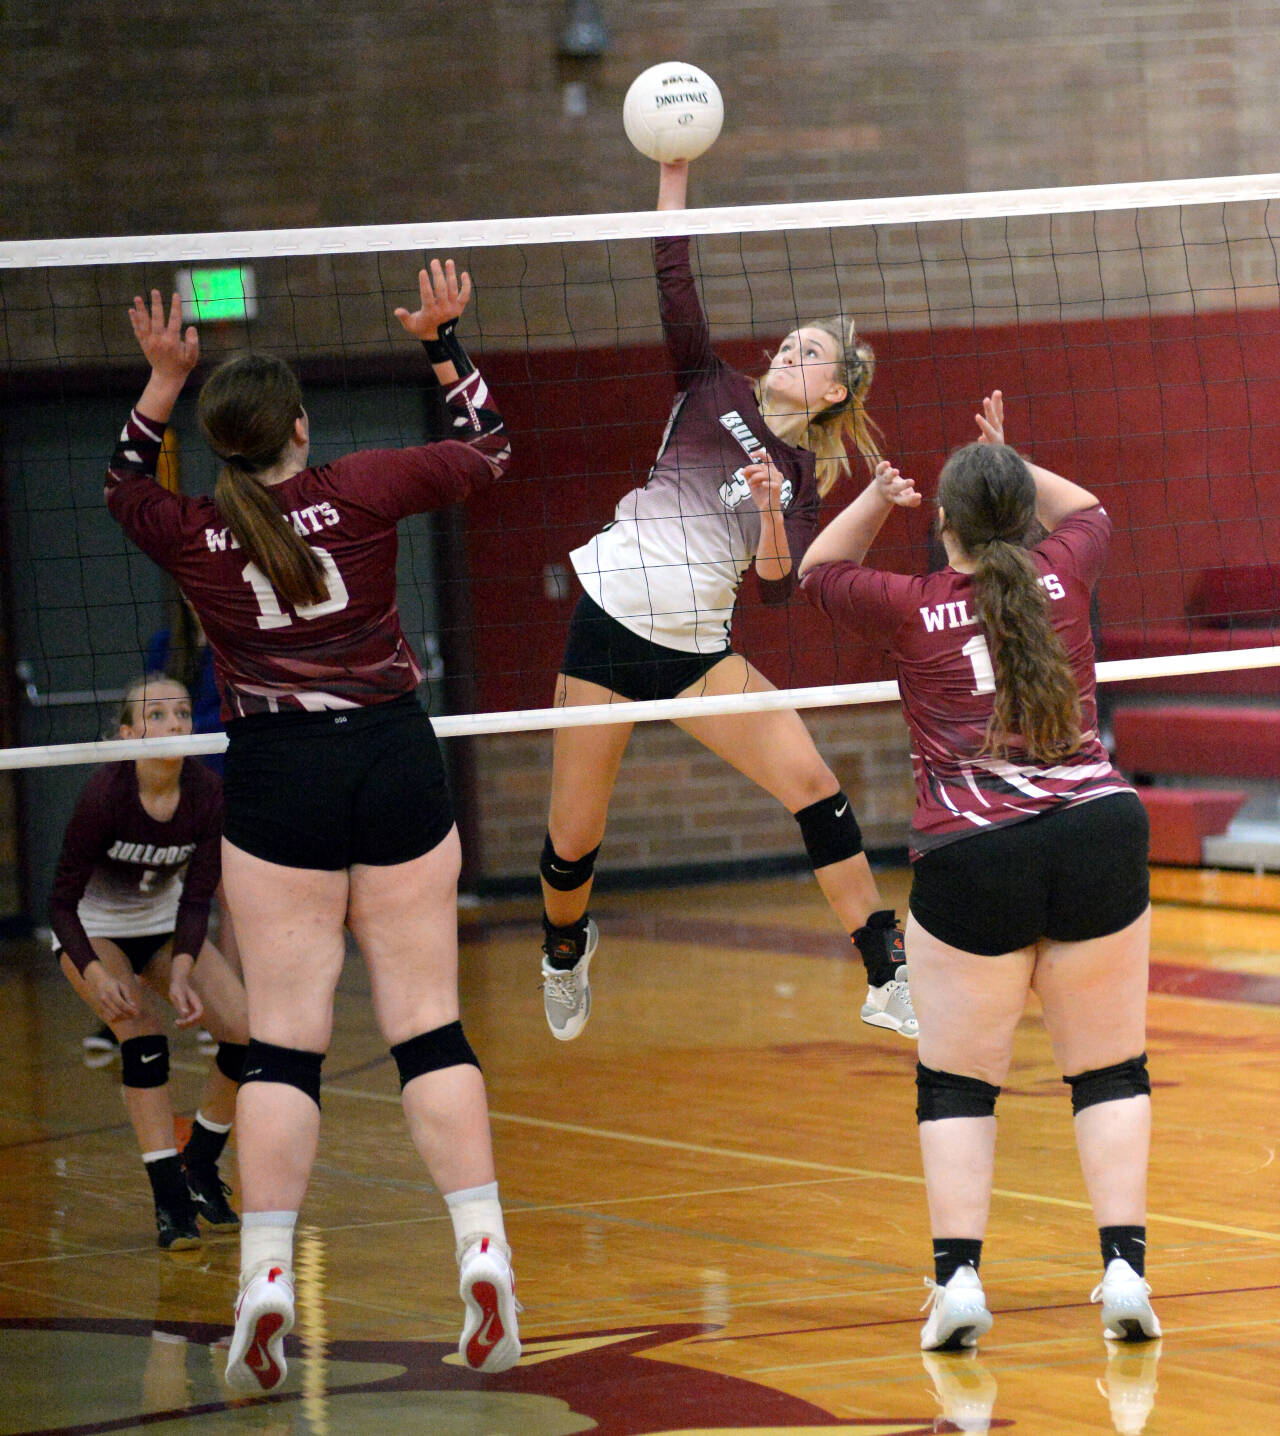 RYAN SPARKS | THE DAILY WORLD Montesano outside hitter Ashlyn Devereaux (3) records one of her 10 kills during the Bulldogs’ 3-0 win over Ocosta in a non-league match on Wednesday in Montesano.